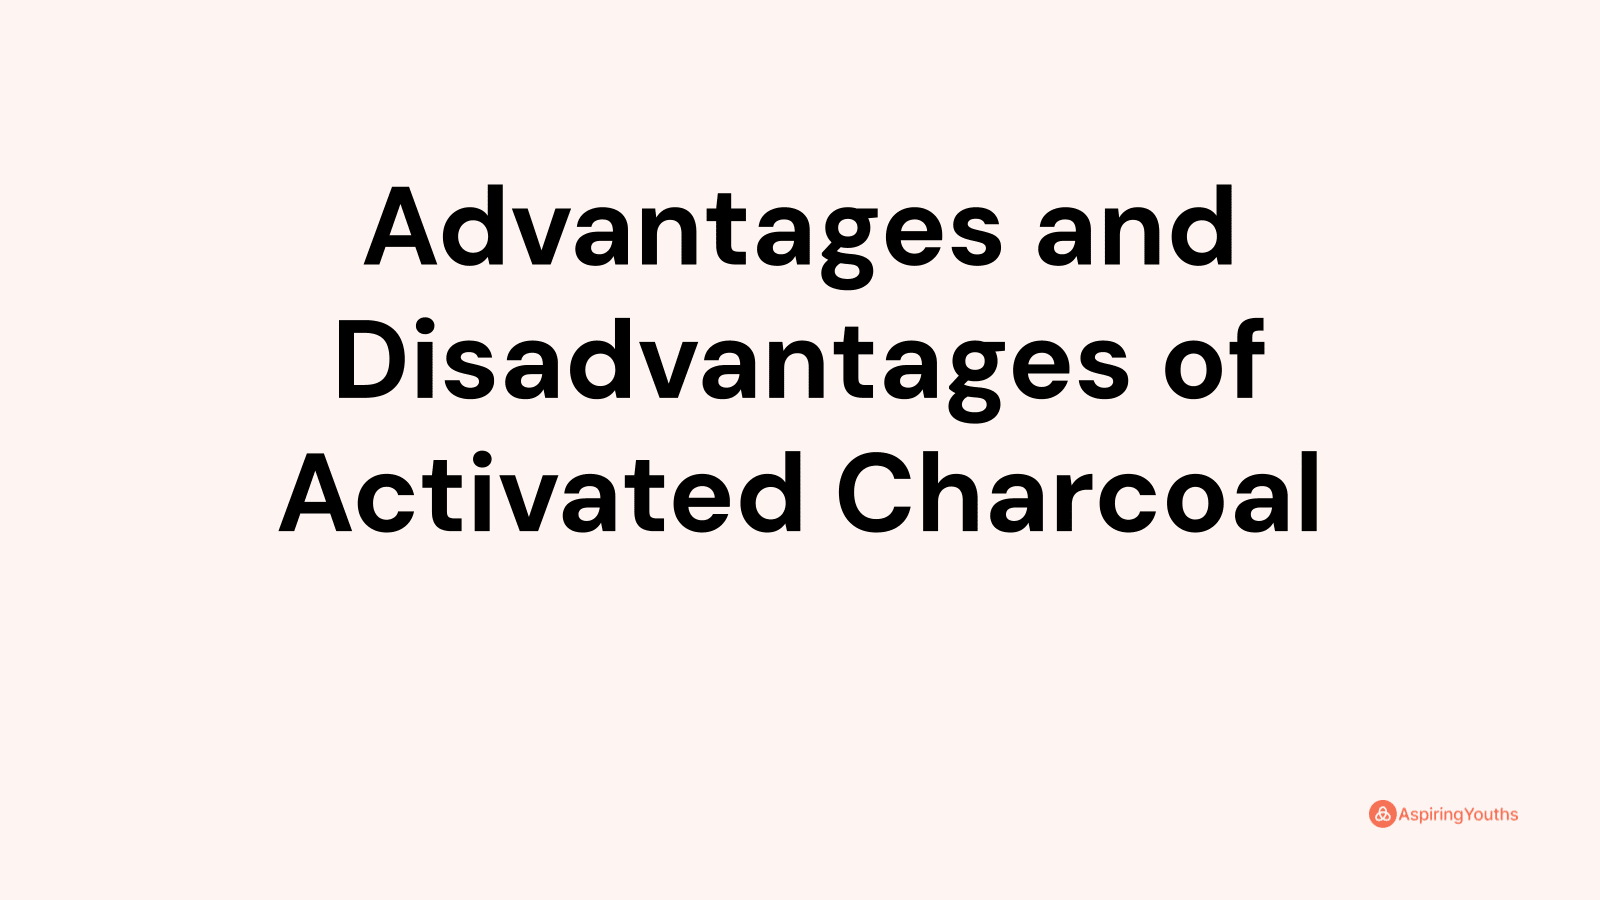 Advantages and disadvantages of Activated Charcoal